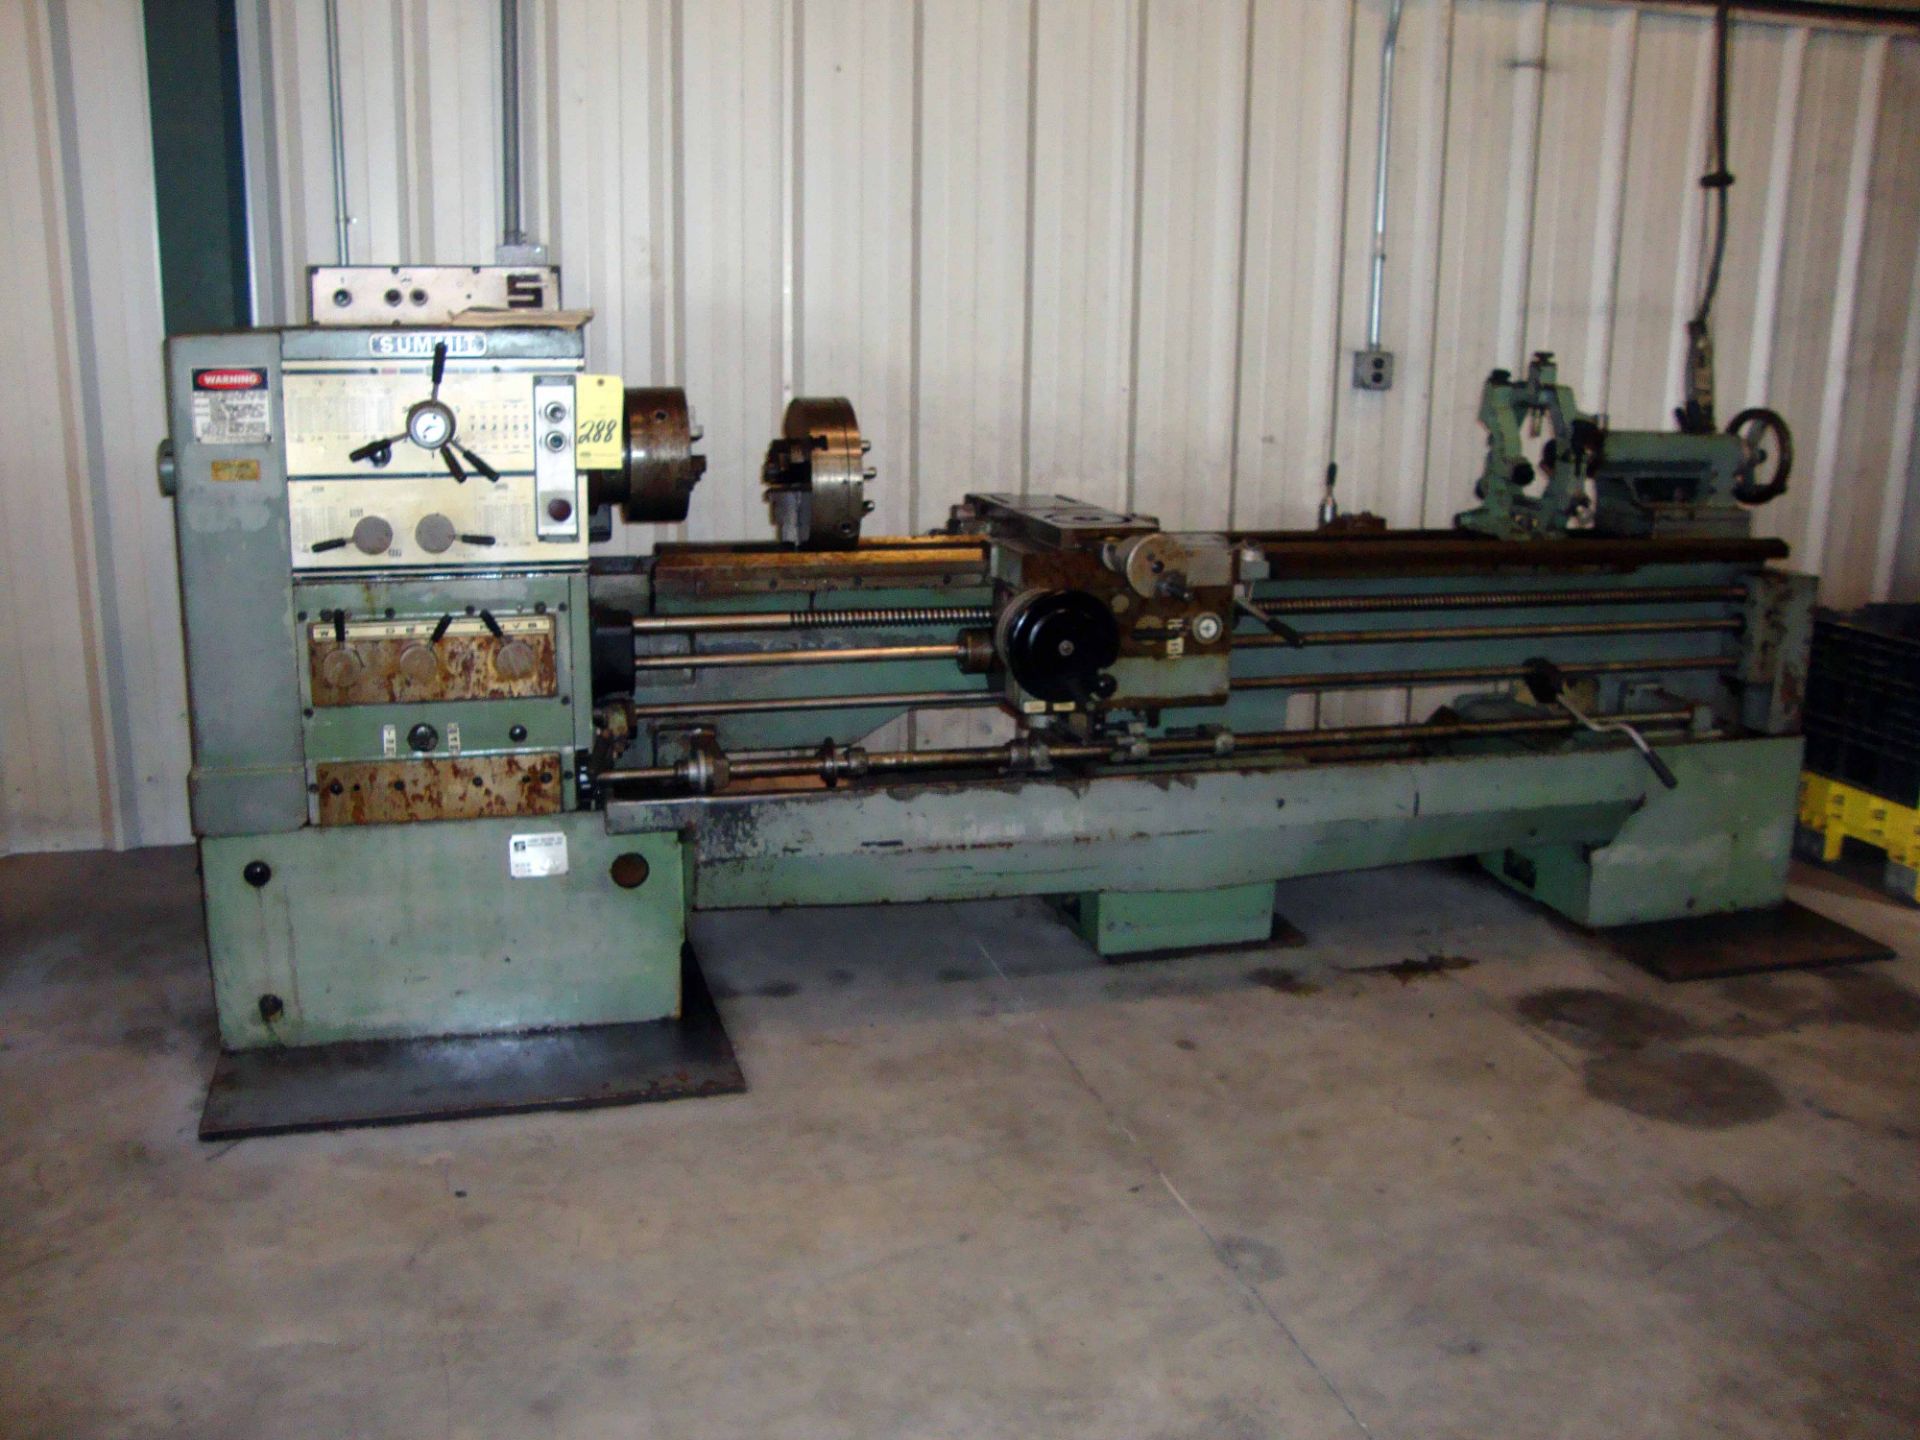 GAP BED ENGINE LATHE, SUMMIT 16" X 80", spds: 25-2000 RPM, 2-1/8" spdl. hole, inch/metric thdng., - Image 2 of 2